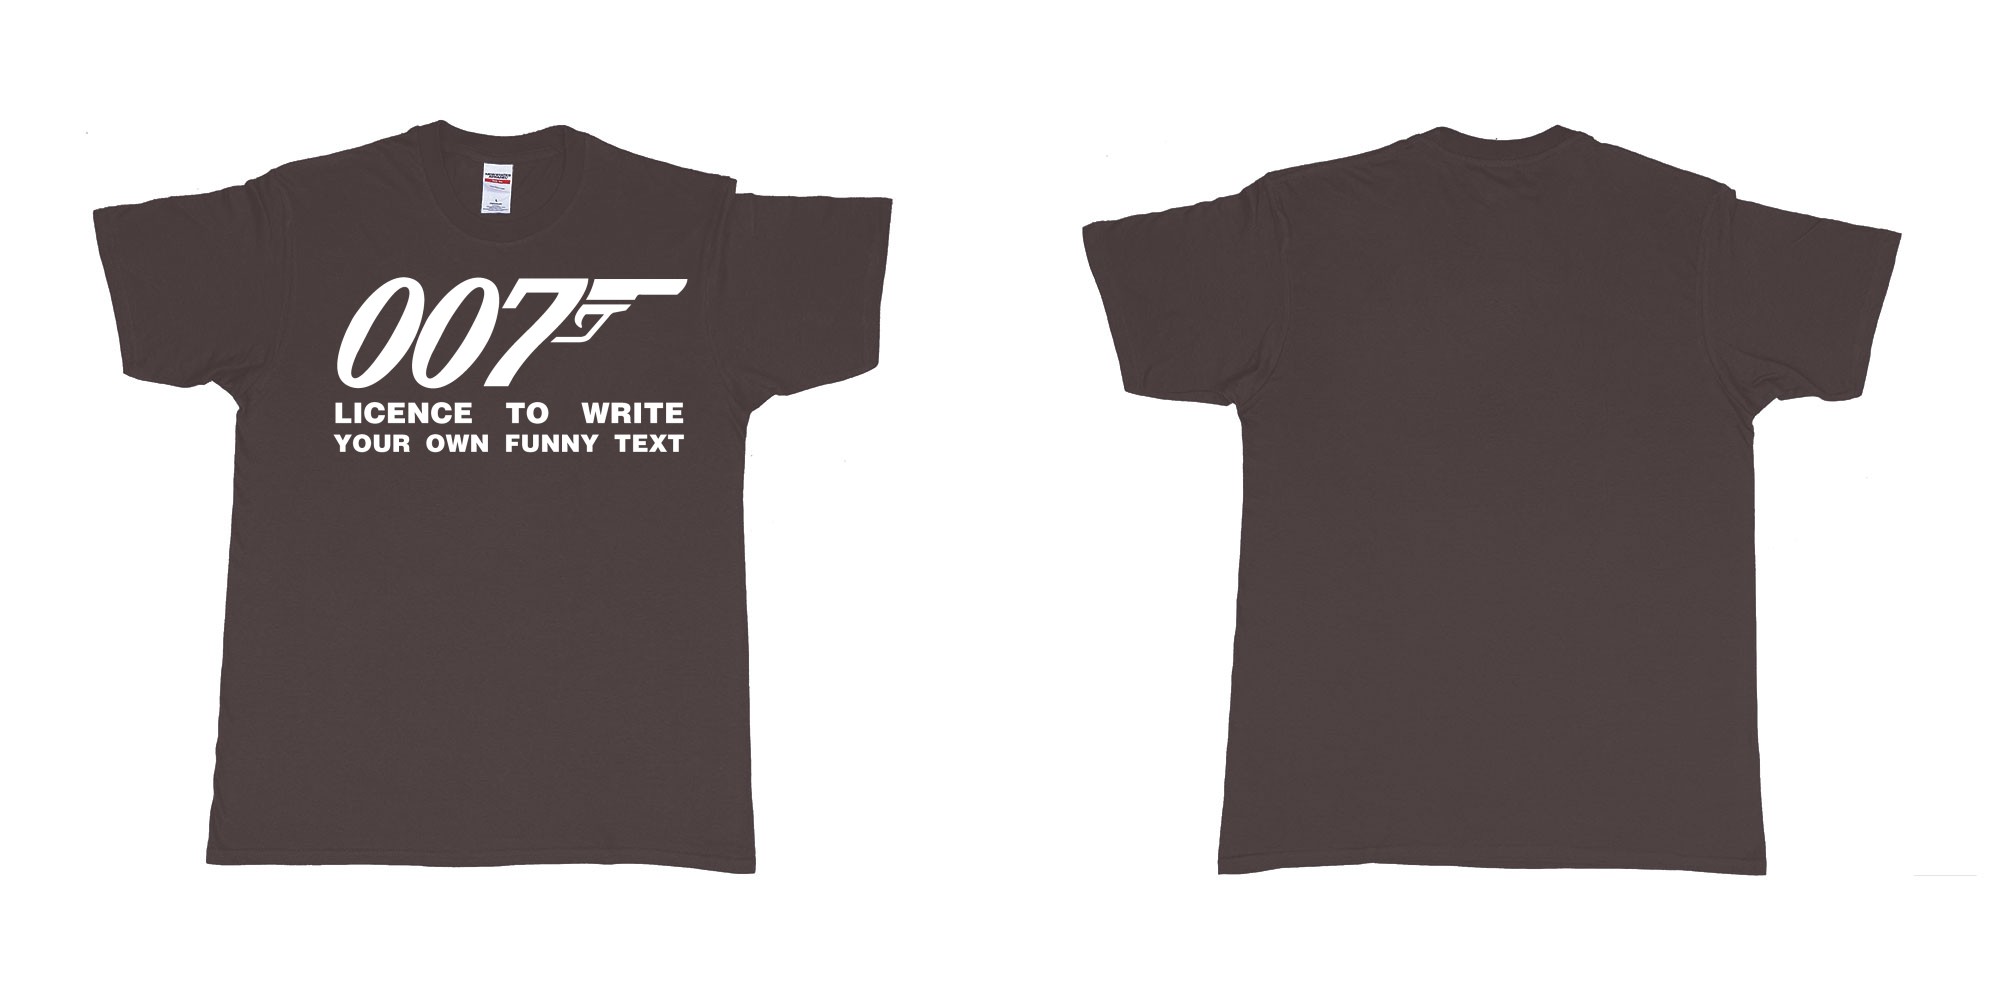 Custom tshirt design james bond logo licence to write own custom text print in fabric color dark-chocolate choice your own text made in Bali by The Pirate Way